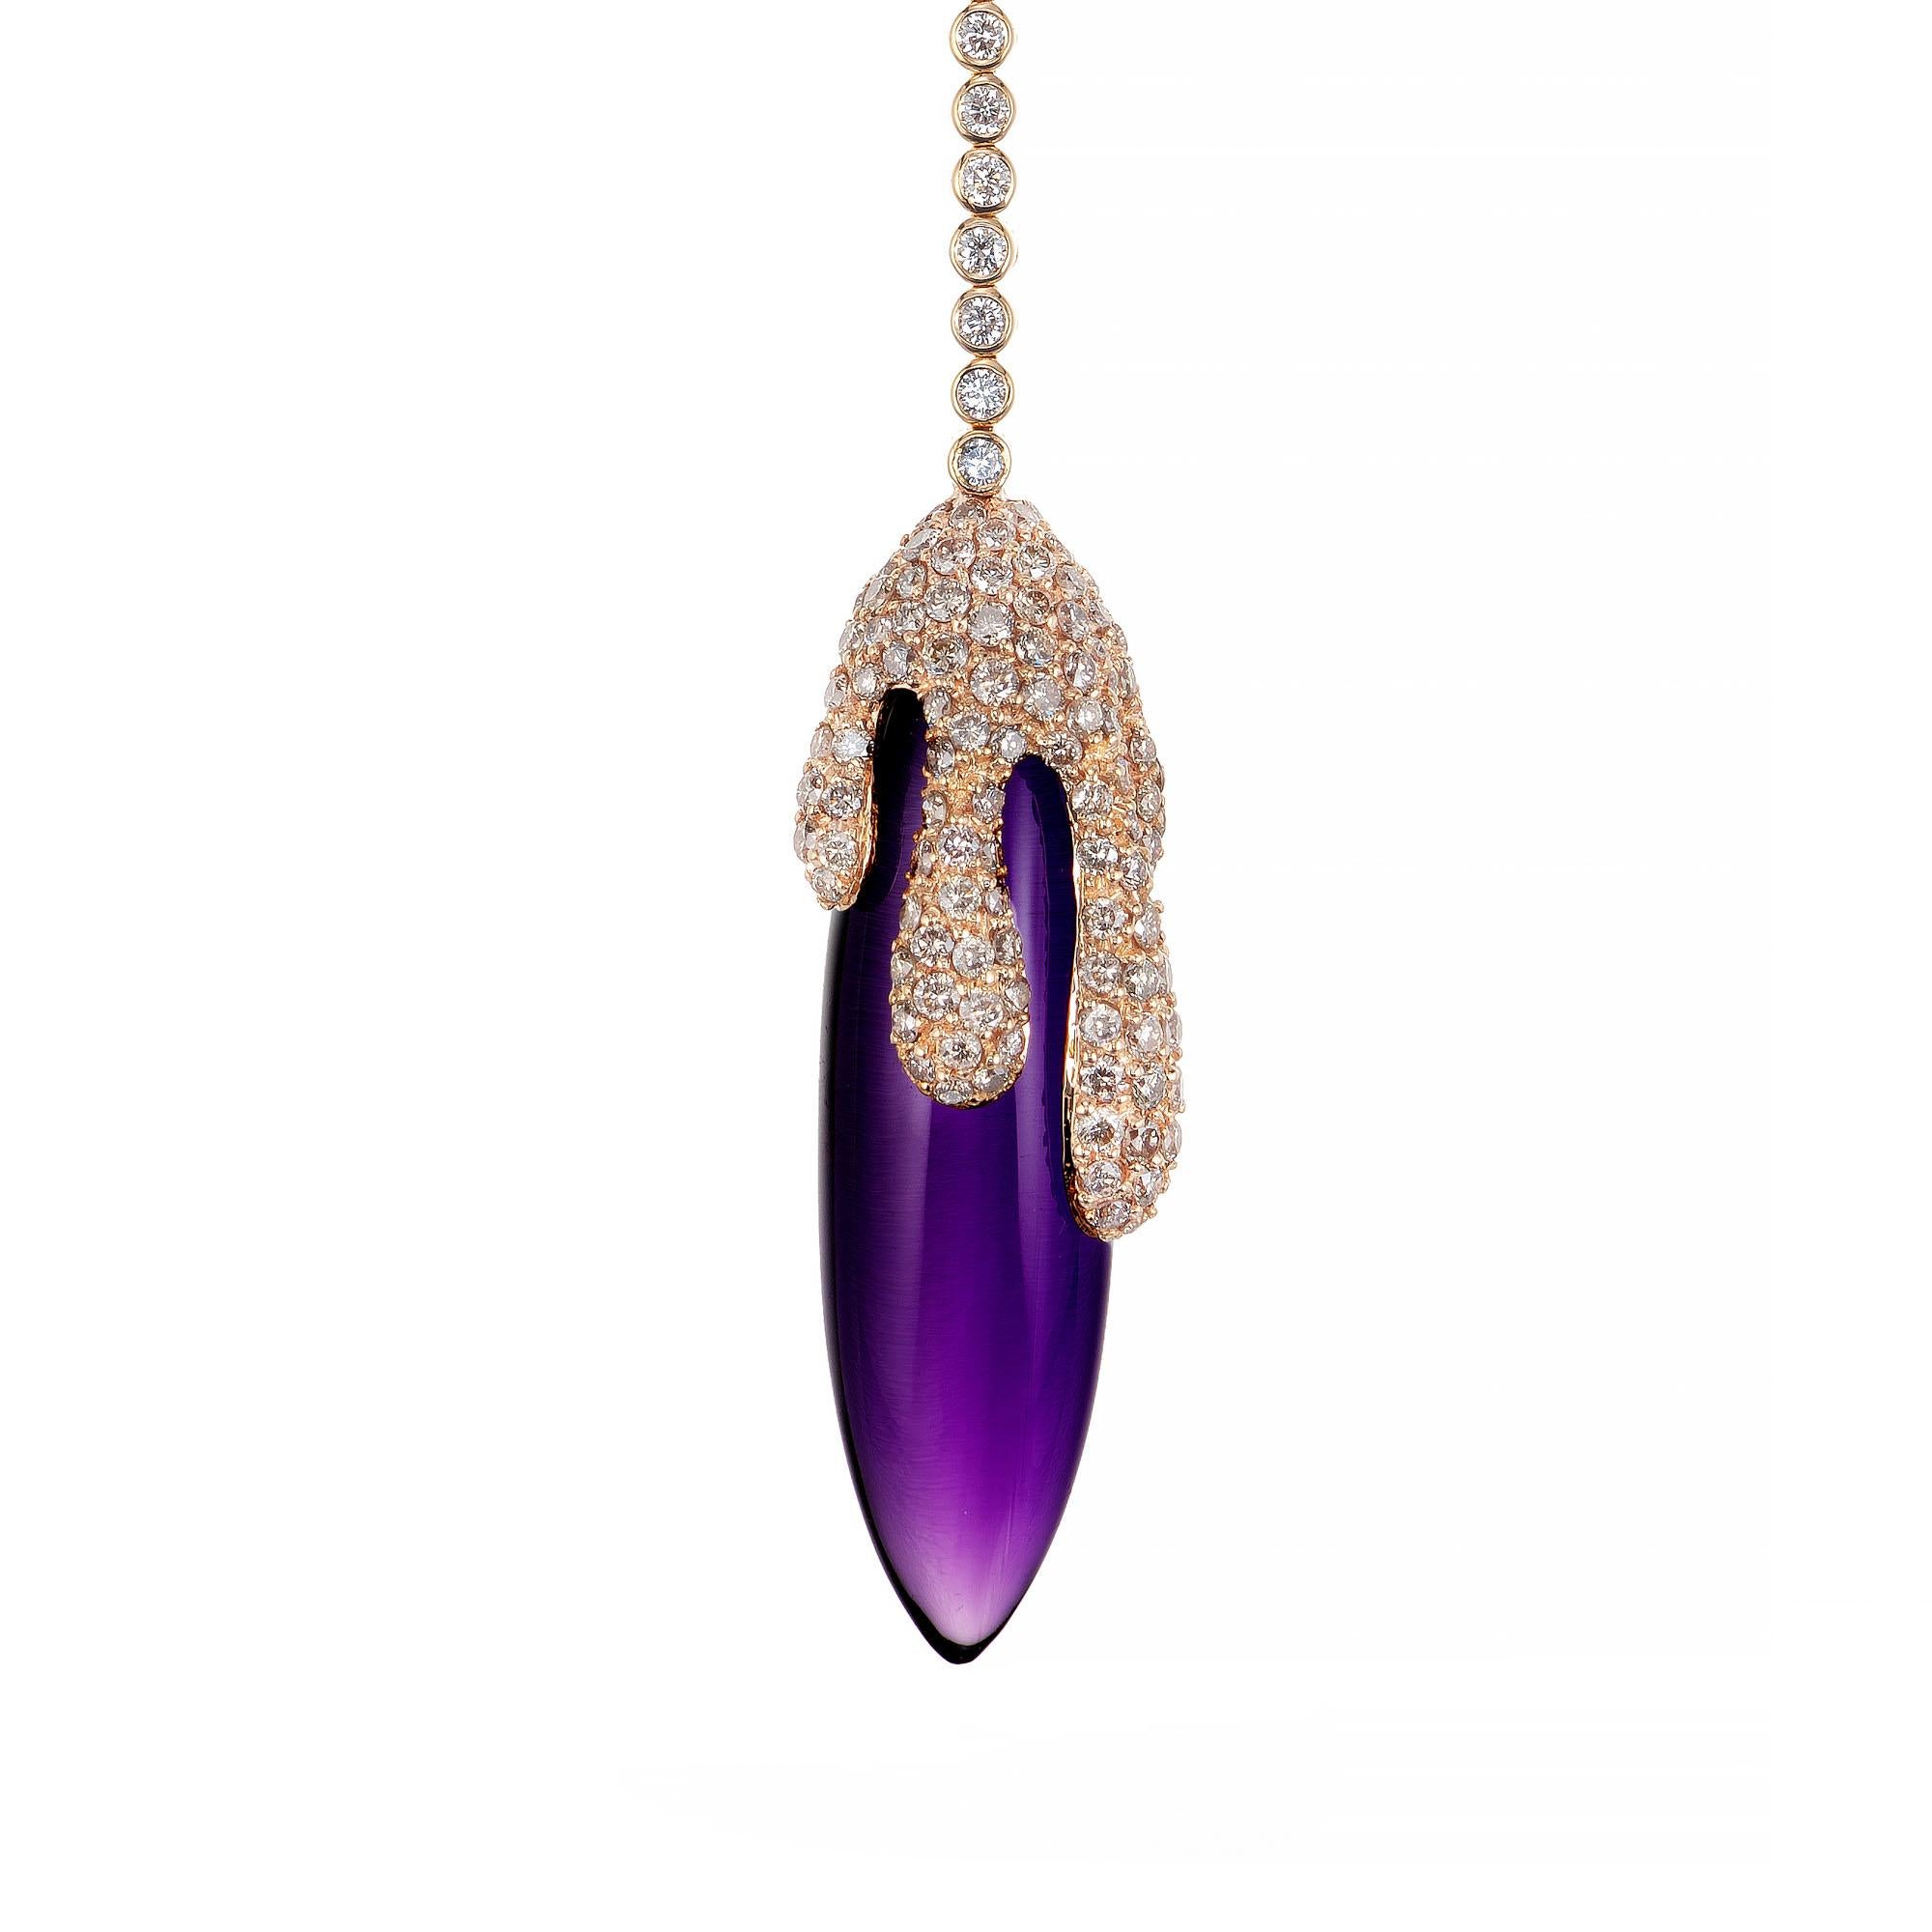 Crivelli 18k rose Gold Amethyst and diamond drop pendant necklace. 15.00cts amethyst with approximately 141 round accent diamonds. 18k rose gold. chain length is adjustable from 15.5 to 17 inches.

Amethyst 34 x 9mm, approx. total weight